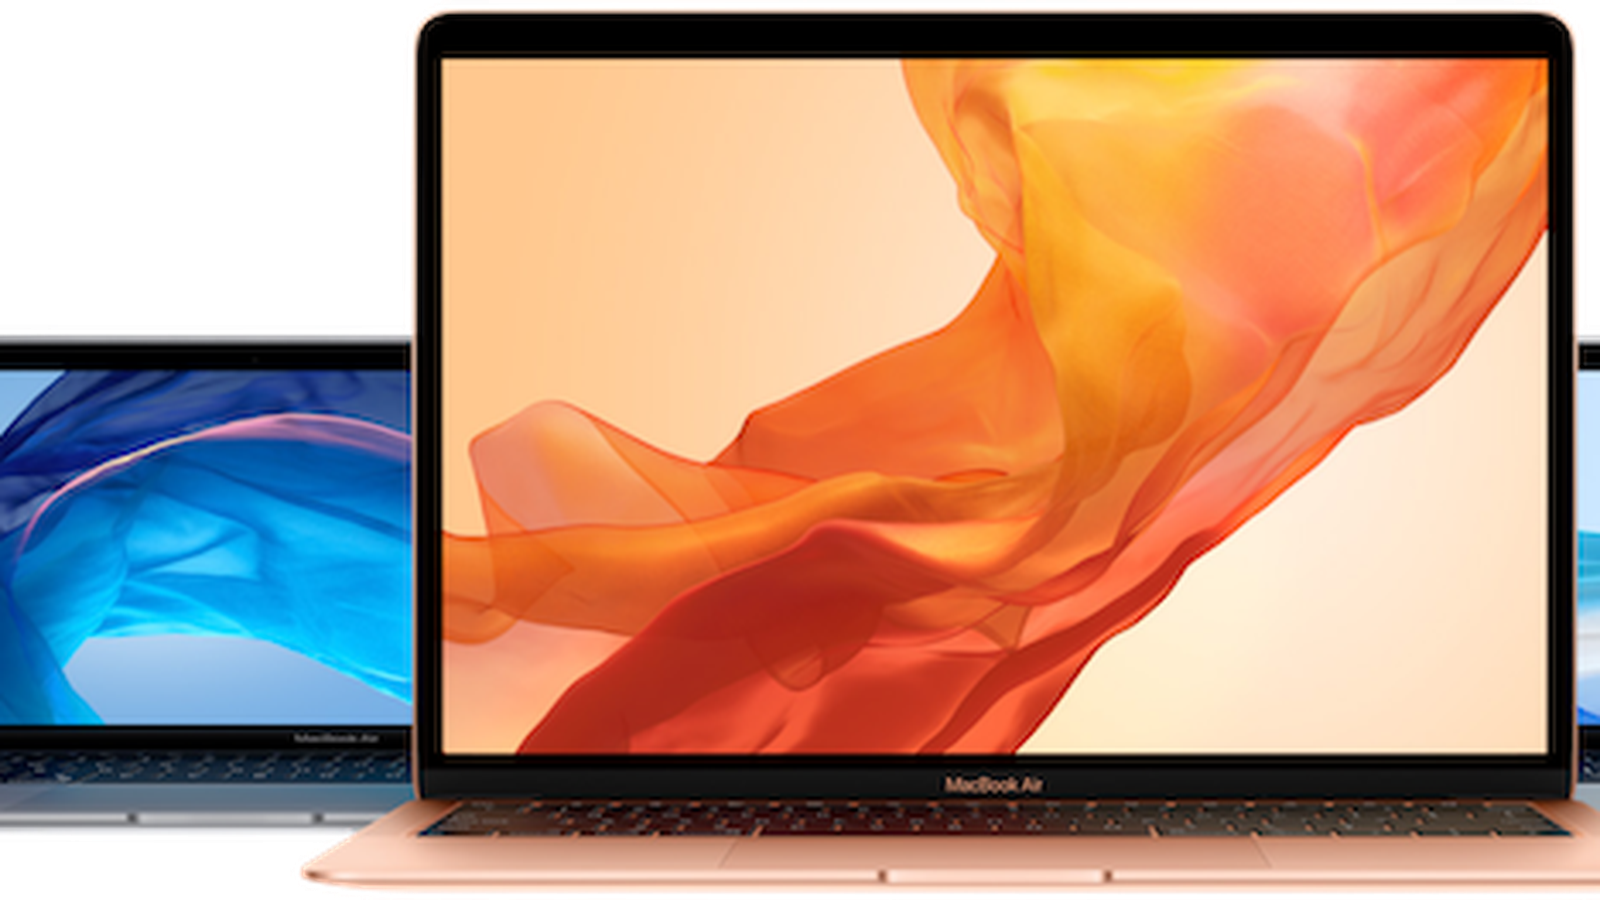 Deals: Get the 128GB 2019 MacBook Air for $899.99 at Amazon ($199 